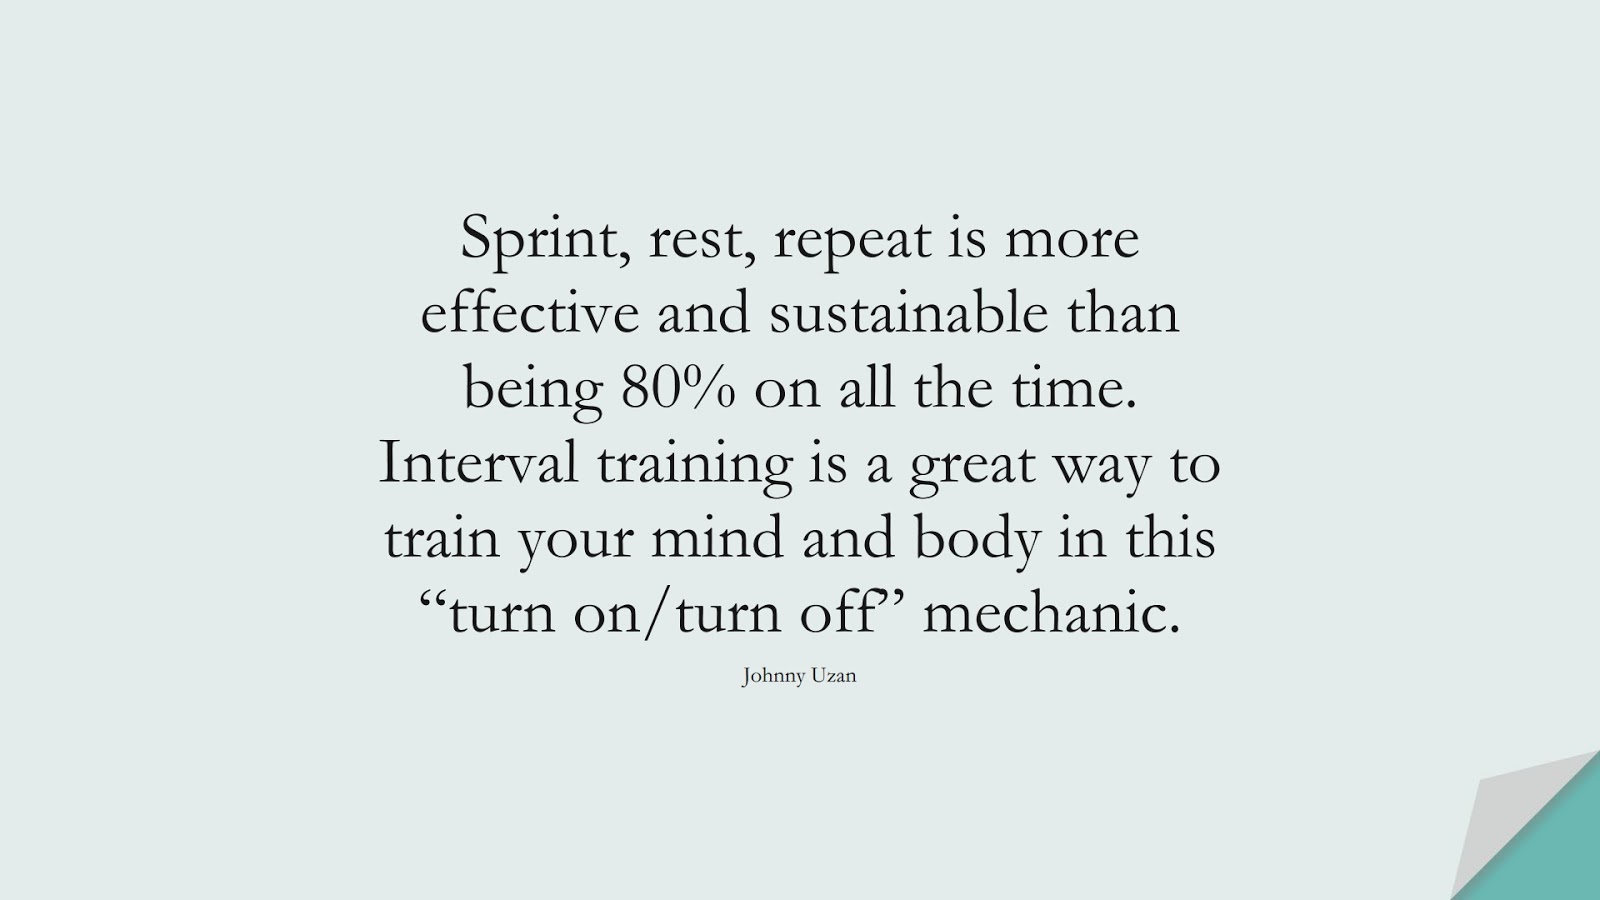 Sprint, rest, repeat is more effective and sustainable than being 80% on all the time. Interval training is a great way to train your mind and body in this “turn on/turn off” mechanic. (Johnny Uzan);  #StressQuotes